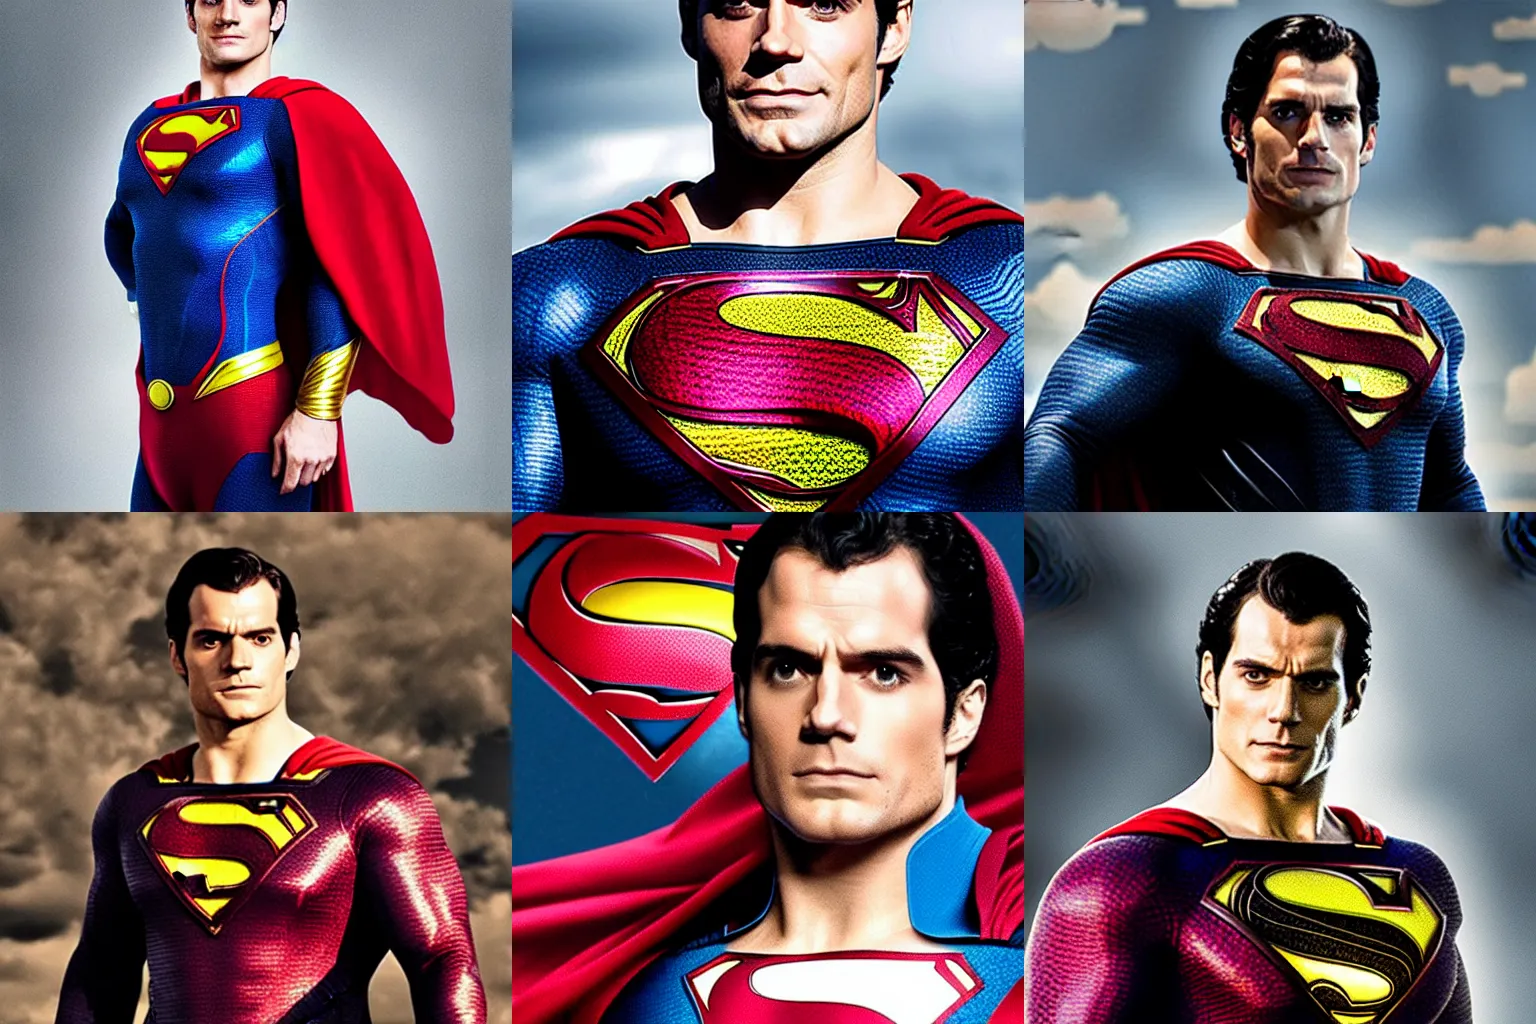 Prompt: Henry Cavill as Superman with a prominent mustache